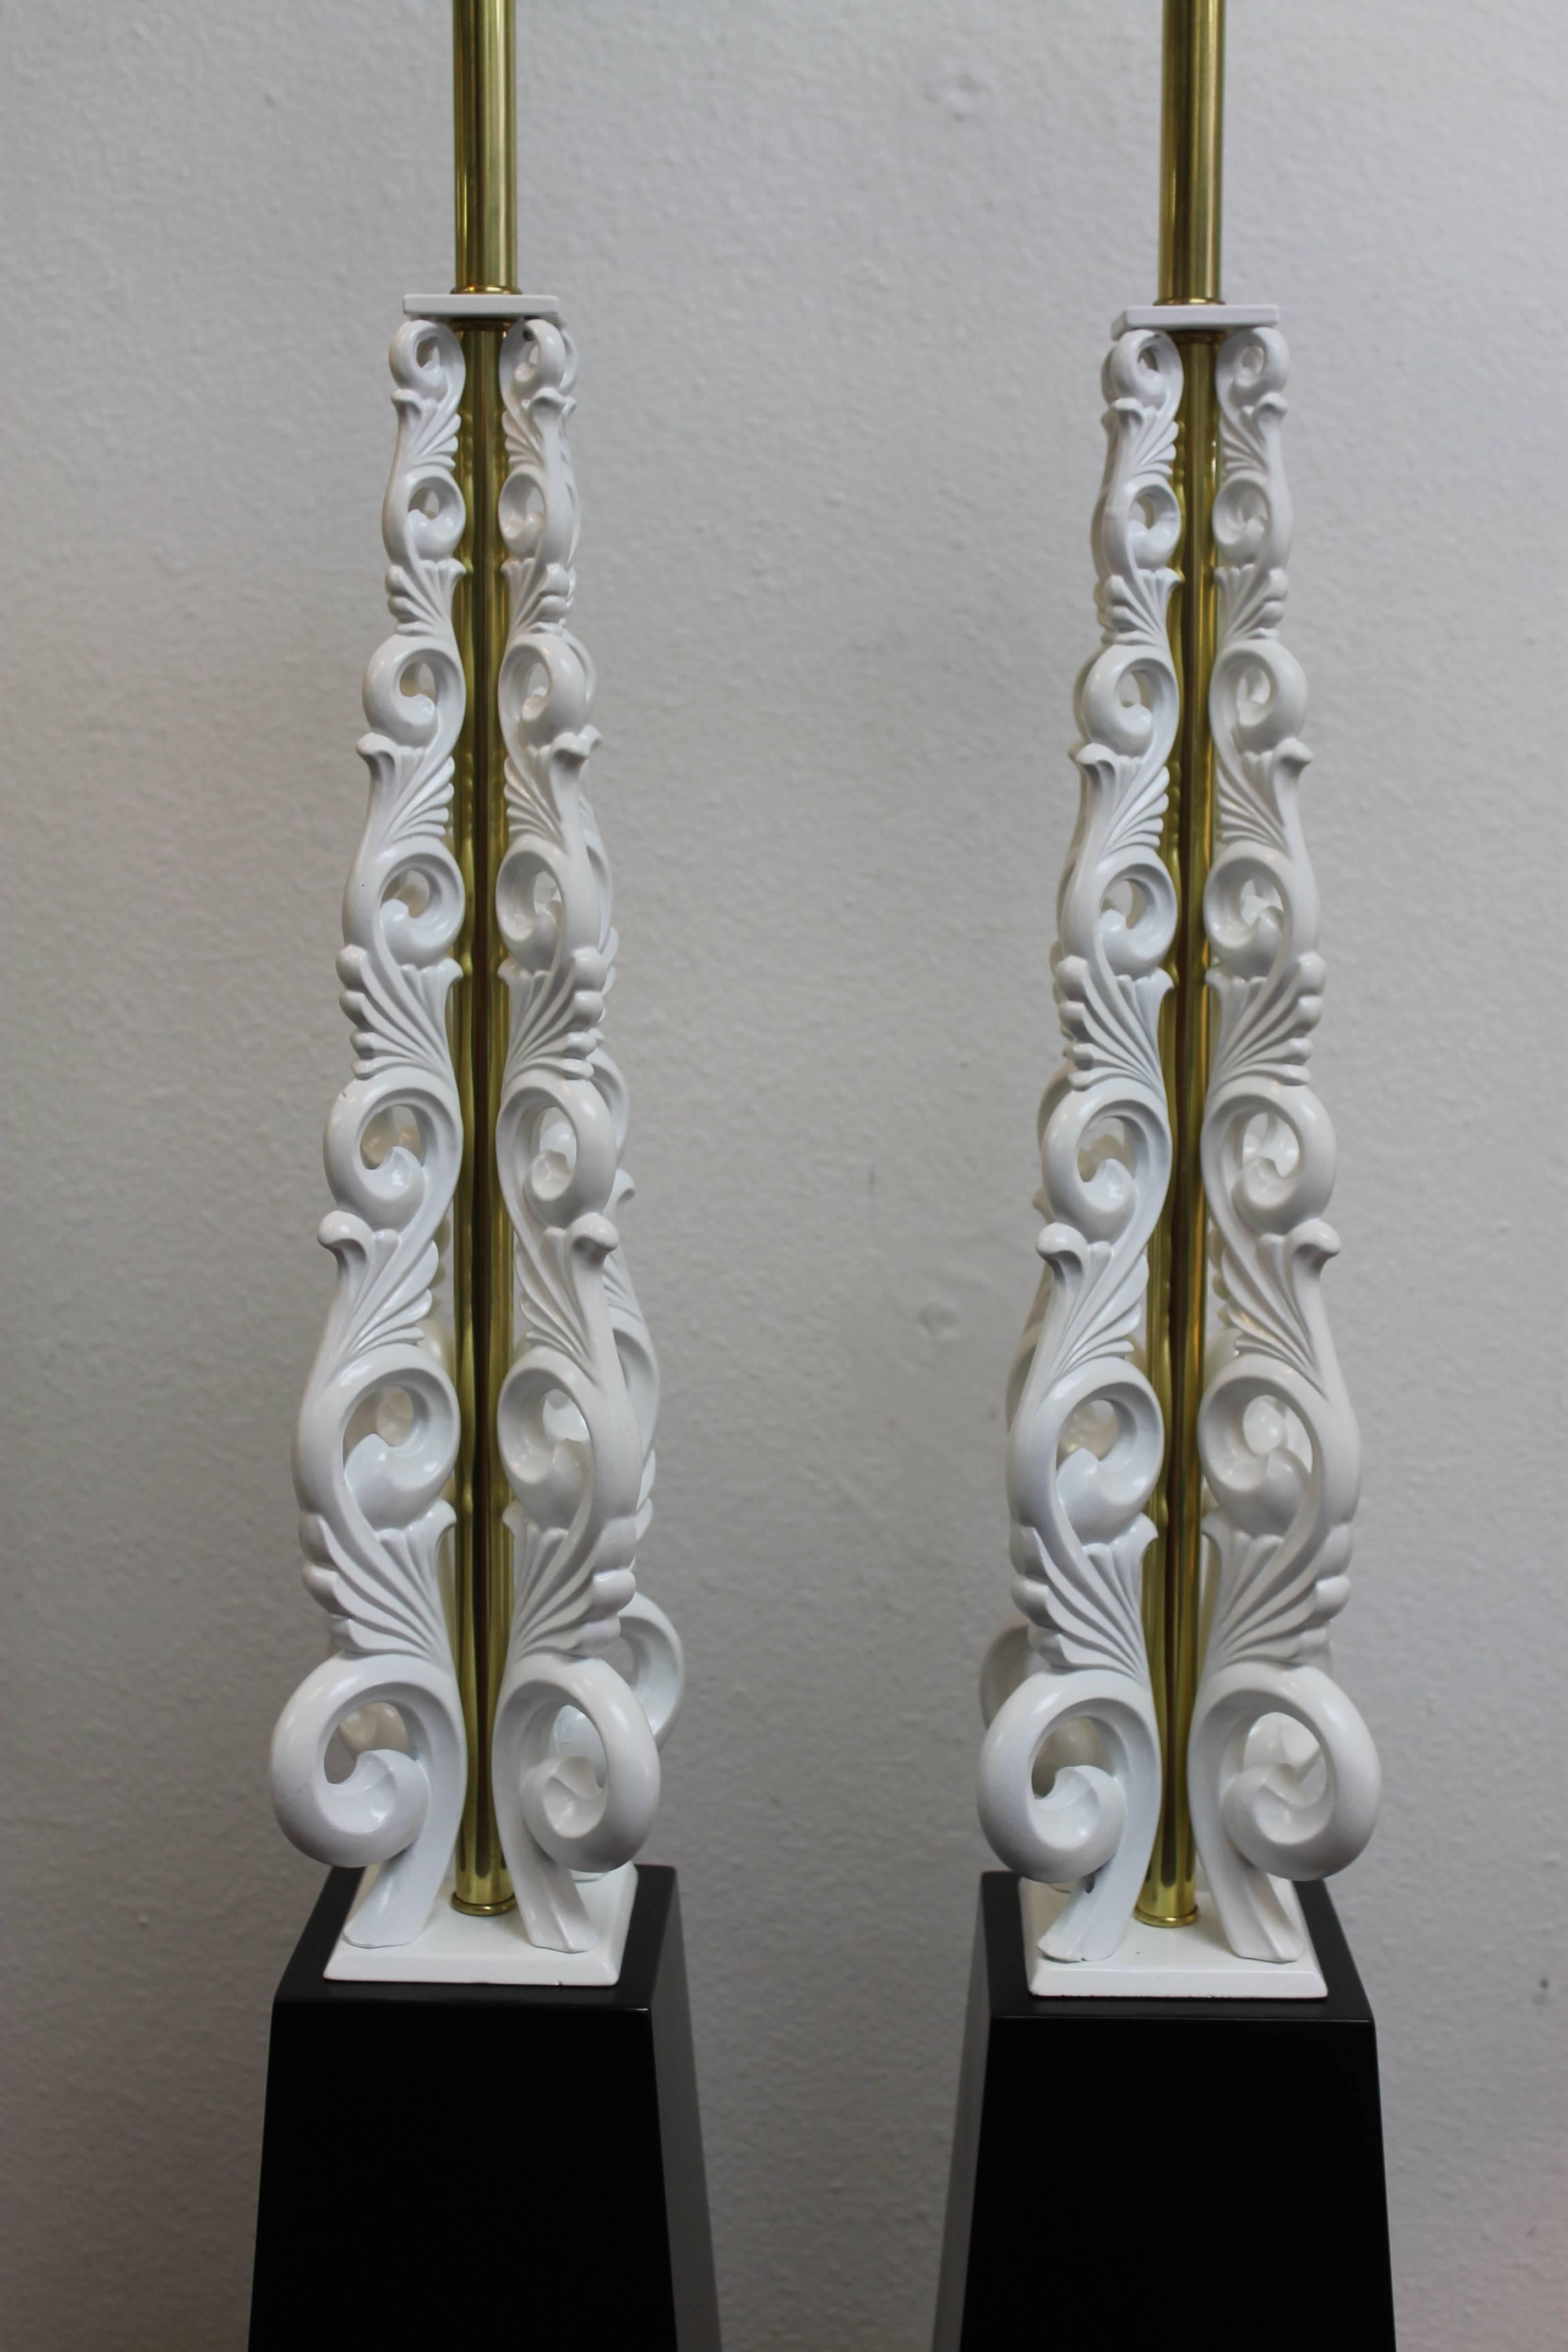 Elegant pair of lamps each with four white aluminum sculpted uprights on top of a wood base. The uprights were originally brass and we decided to update them in white. They have been professionally rewired. They each contain an on/off switch on